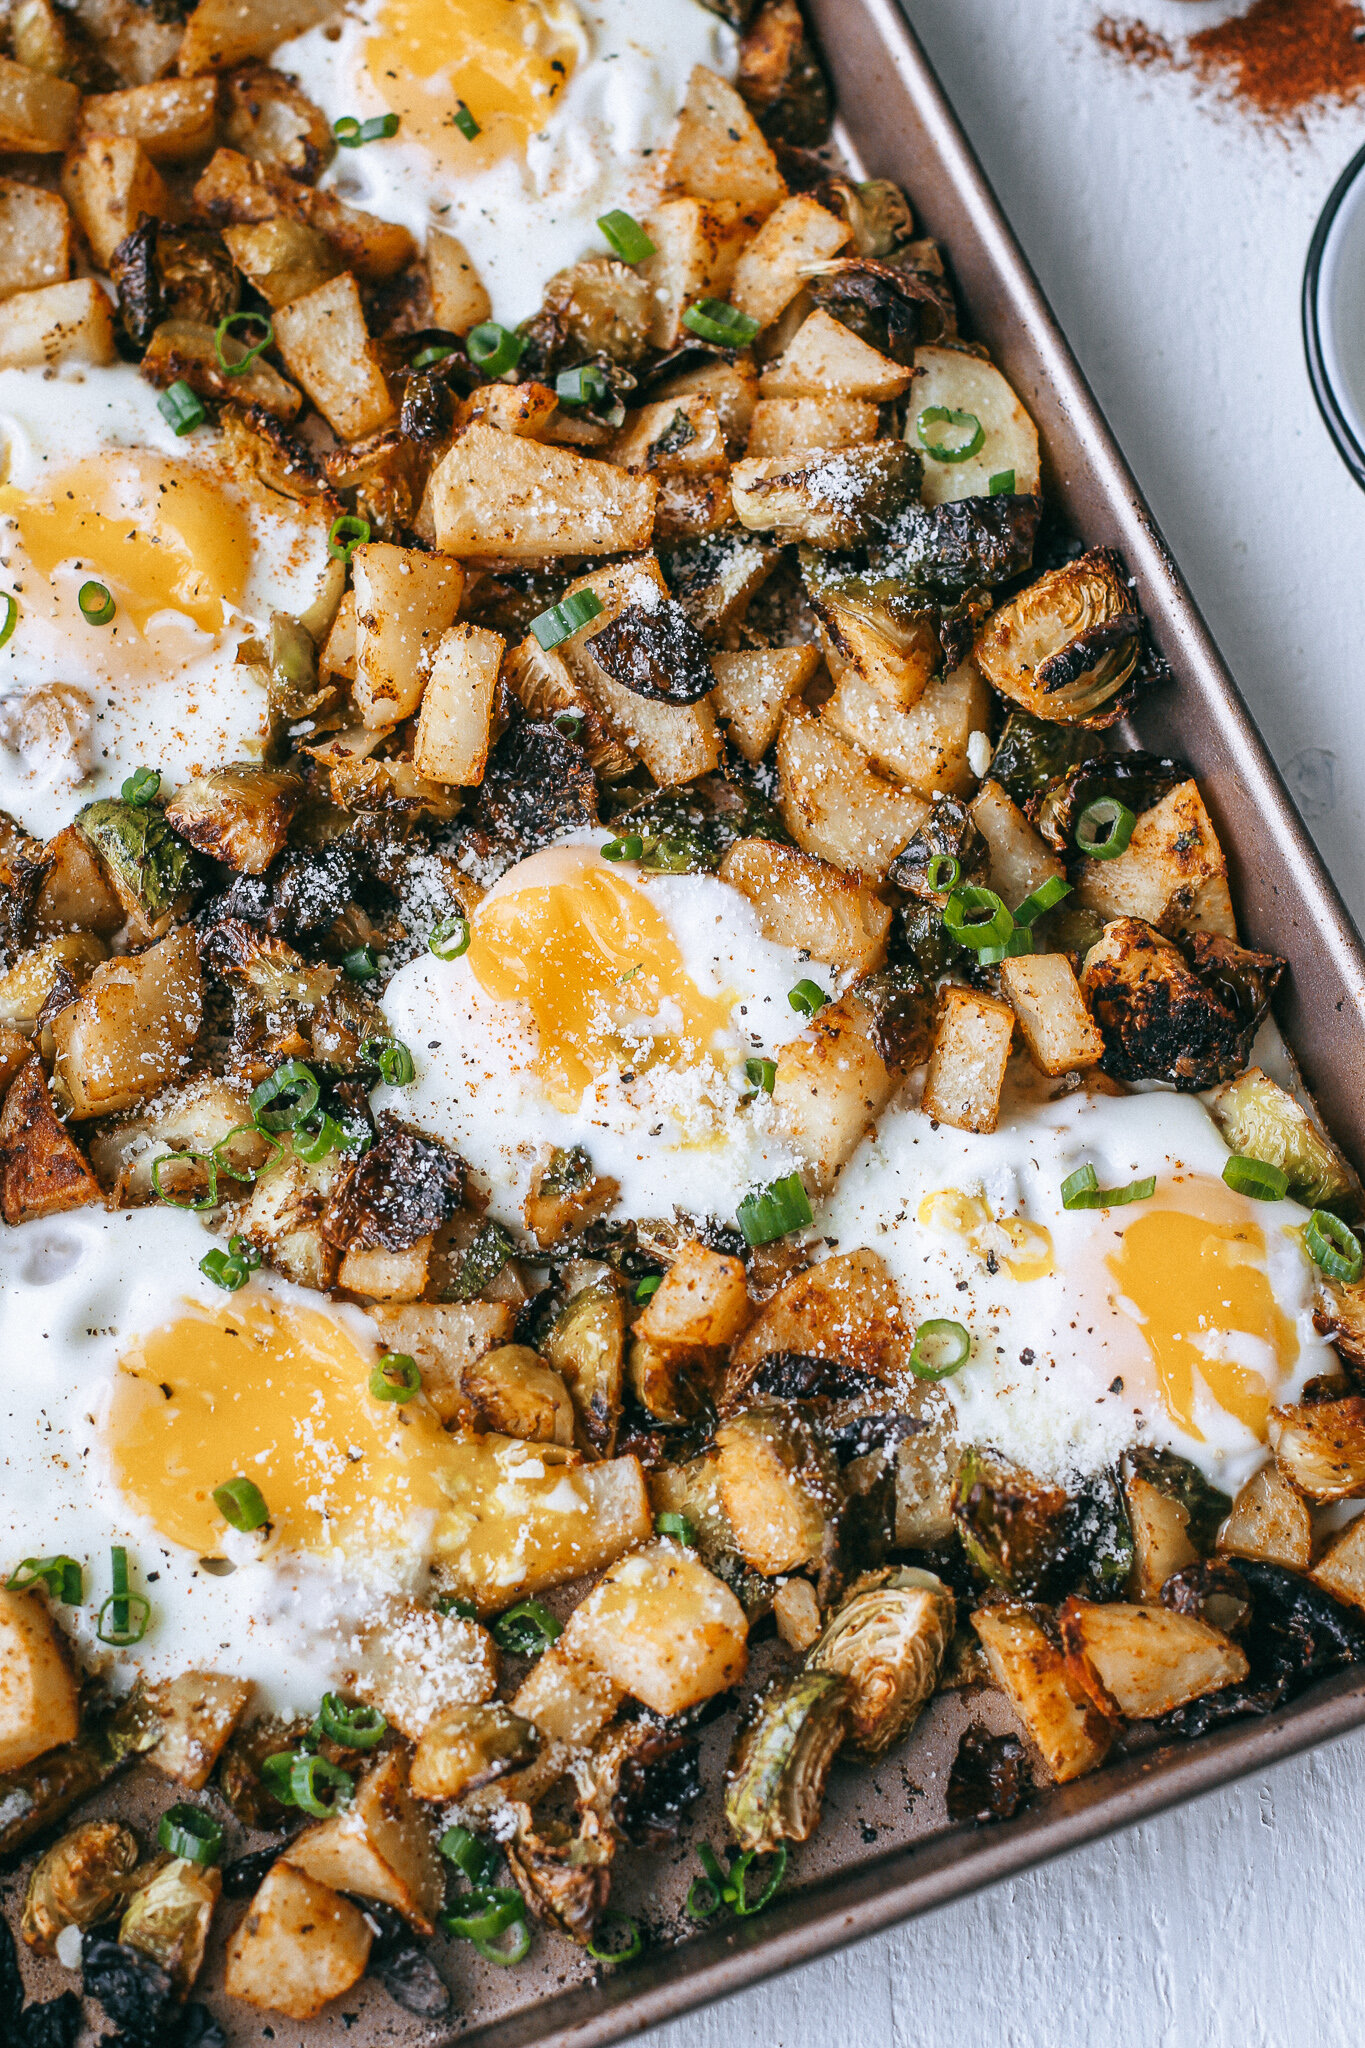 Potato and Brussel Sprouts Breakfast Sheet Pan